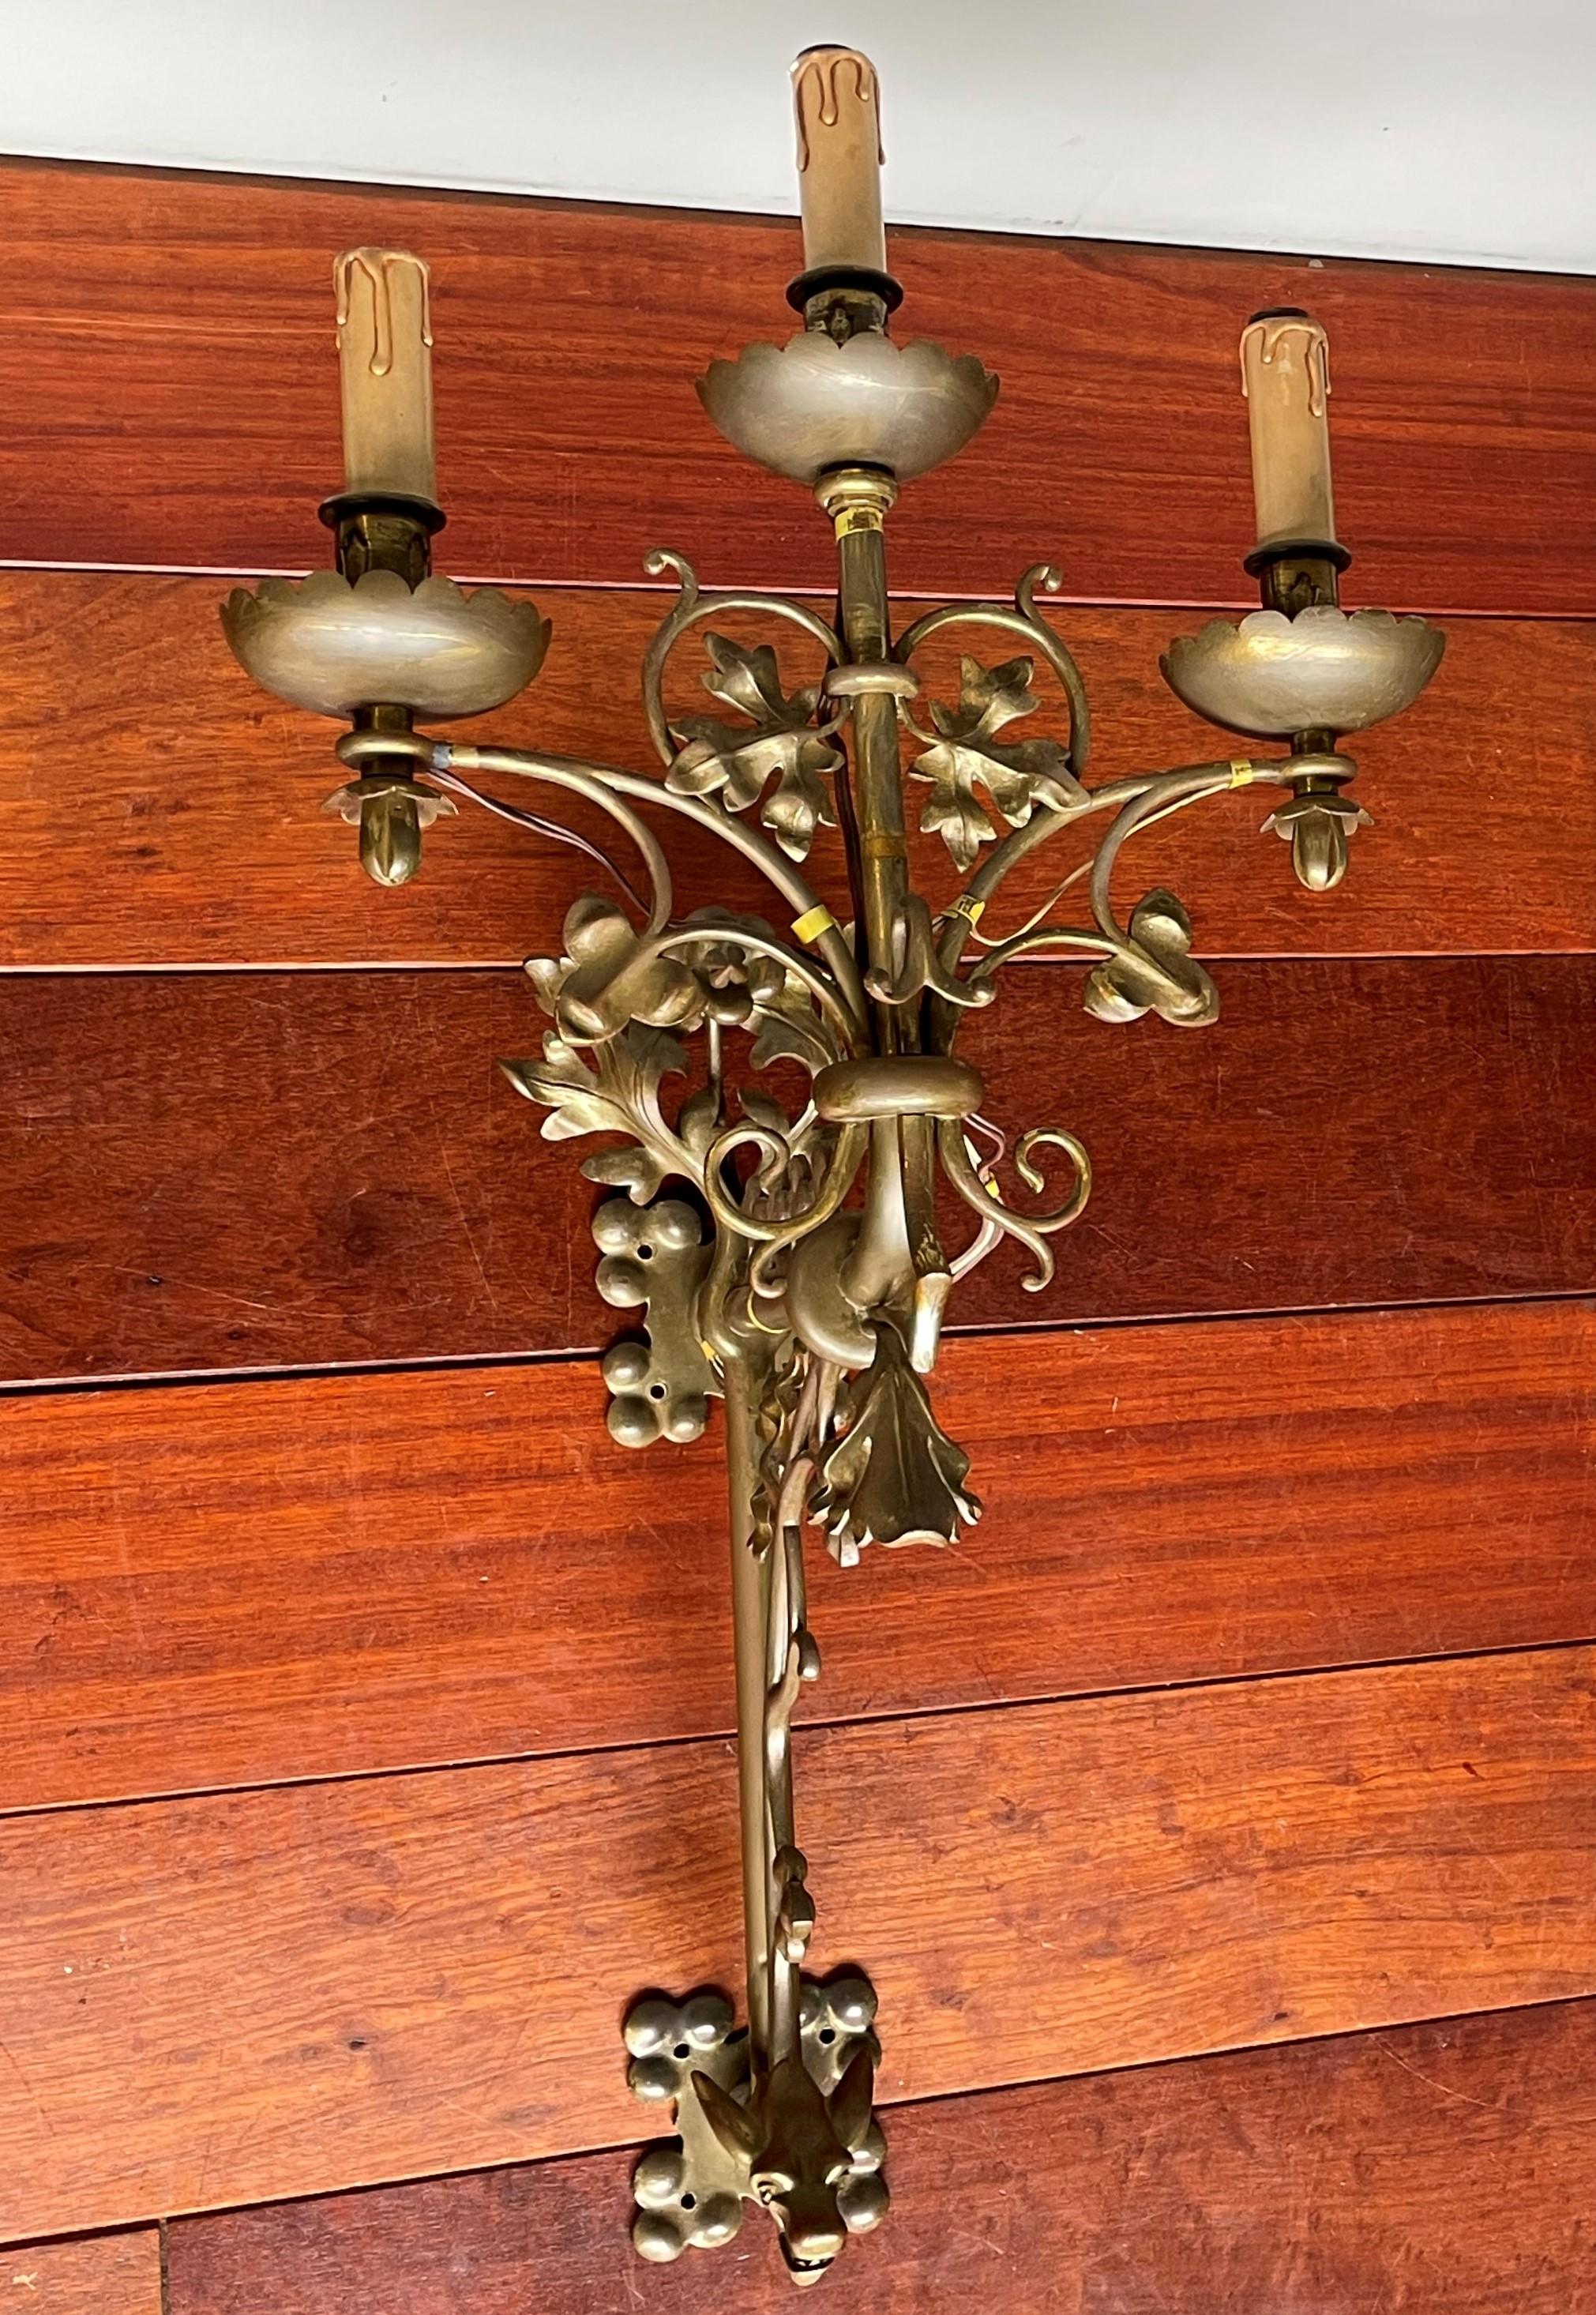 19th Century Large Gothic Revival Bronze Candelabra Wall Sconces / Candle Sconce w. Gargoyles For Sale